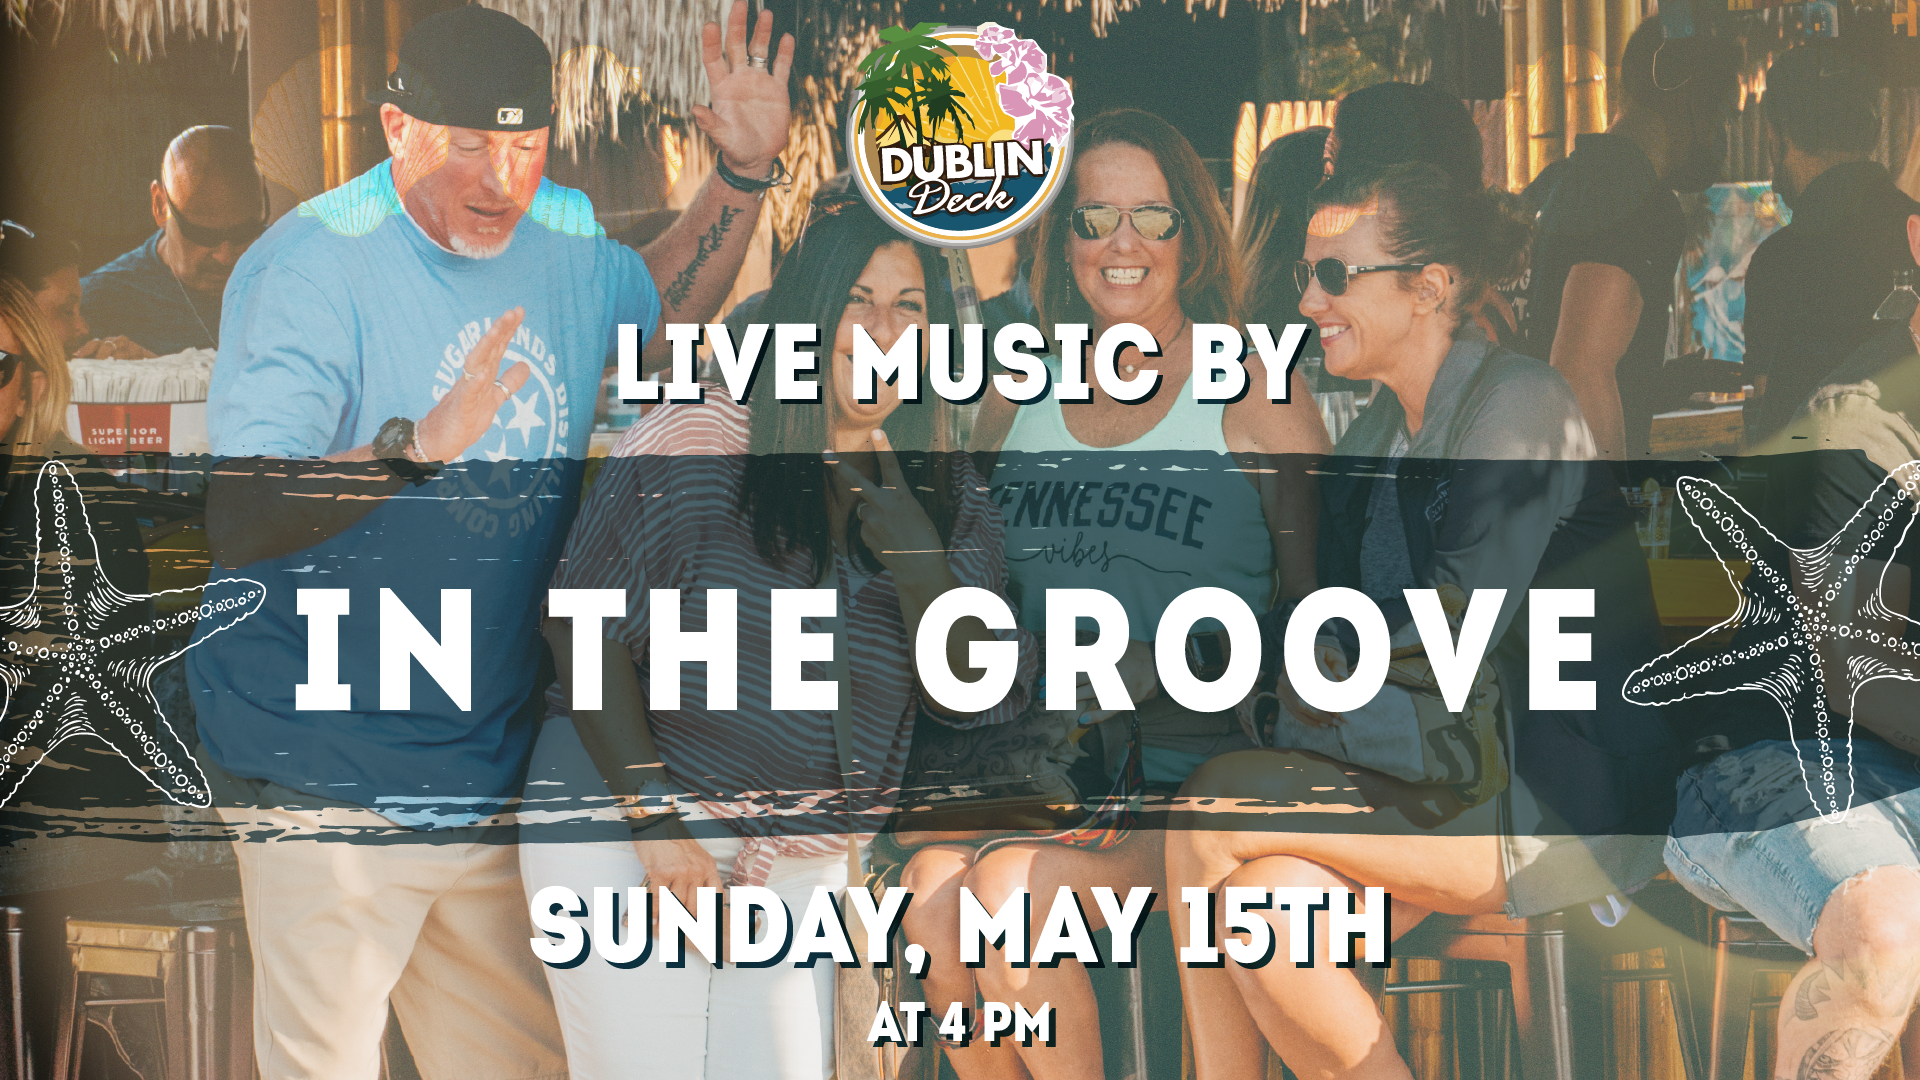 Sunday Funday is well spent jammin' with In The Groove! Music starts at 4PM